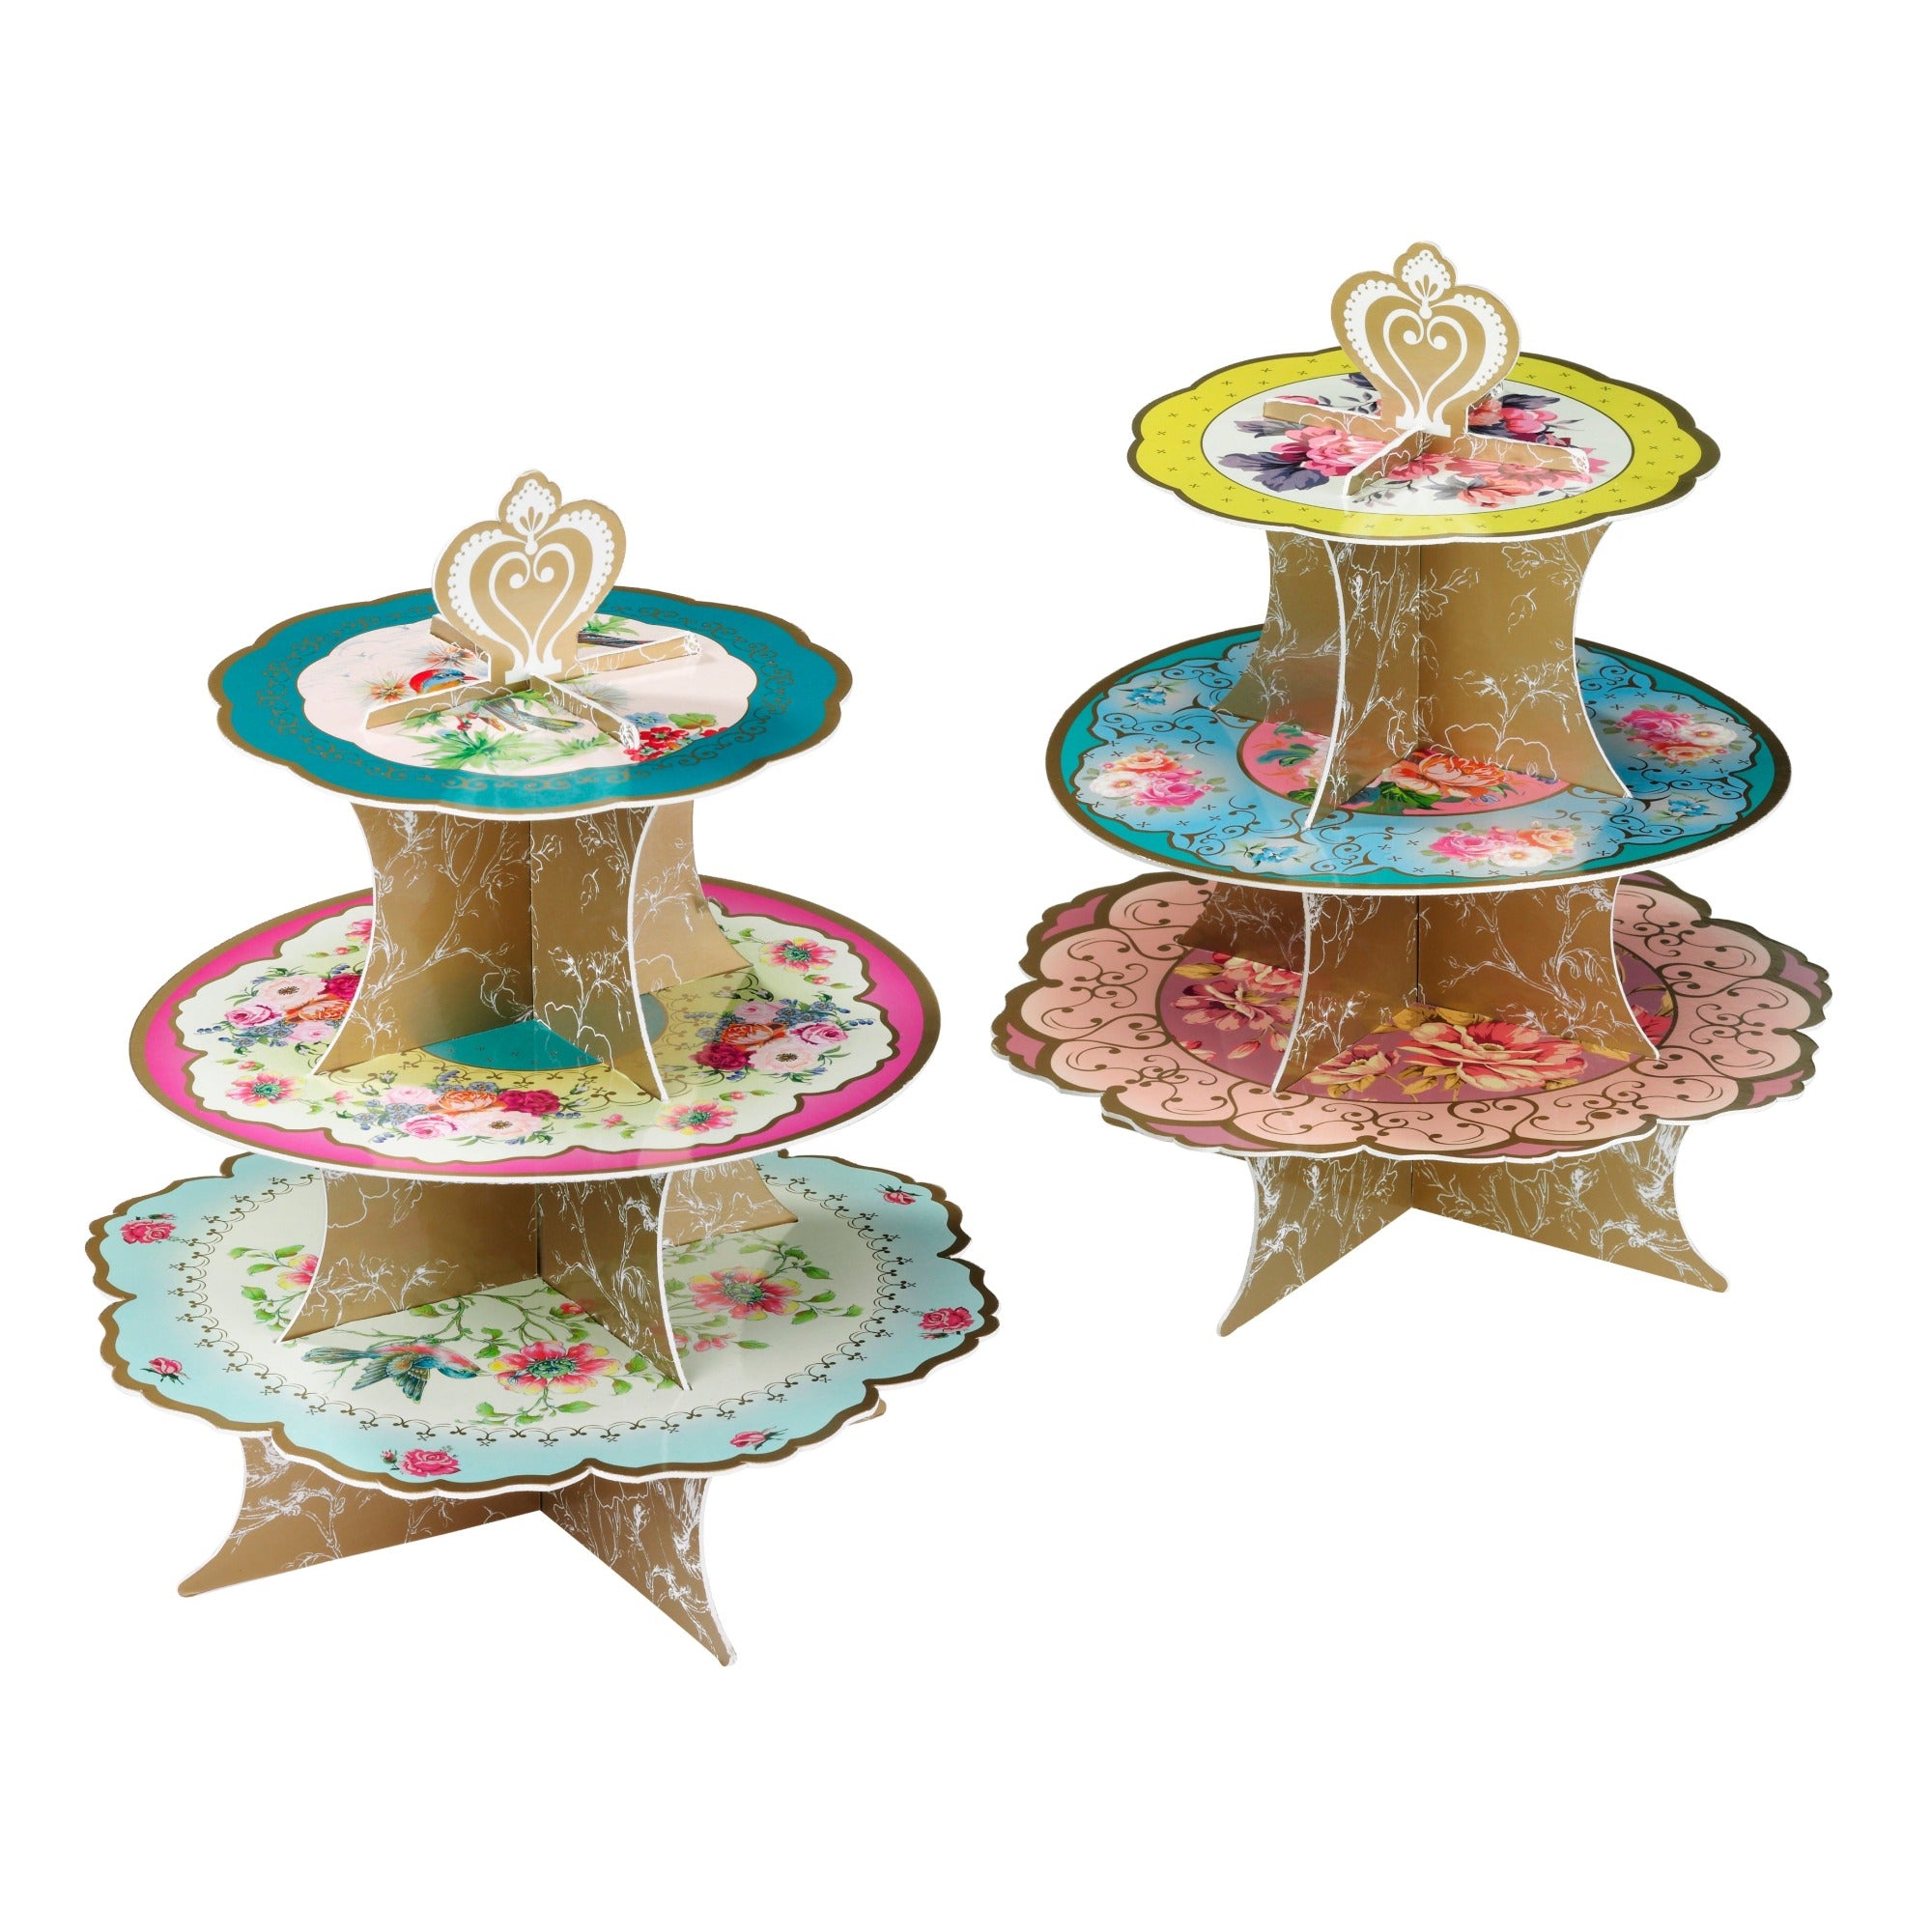 Truly Scrumptious 3 Tier Cake Stands Pack of 3